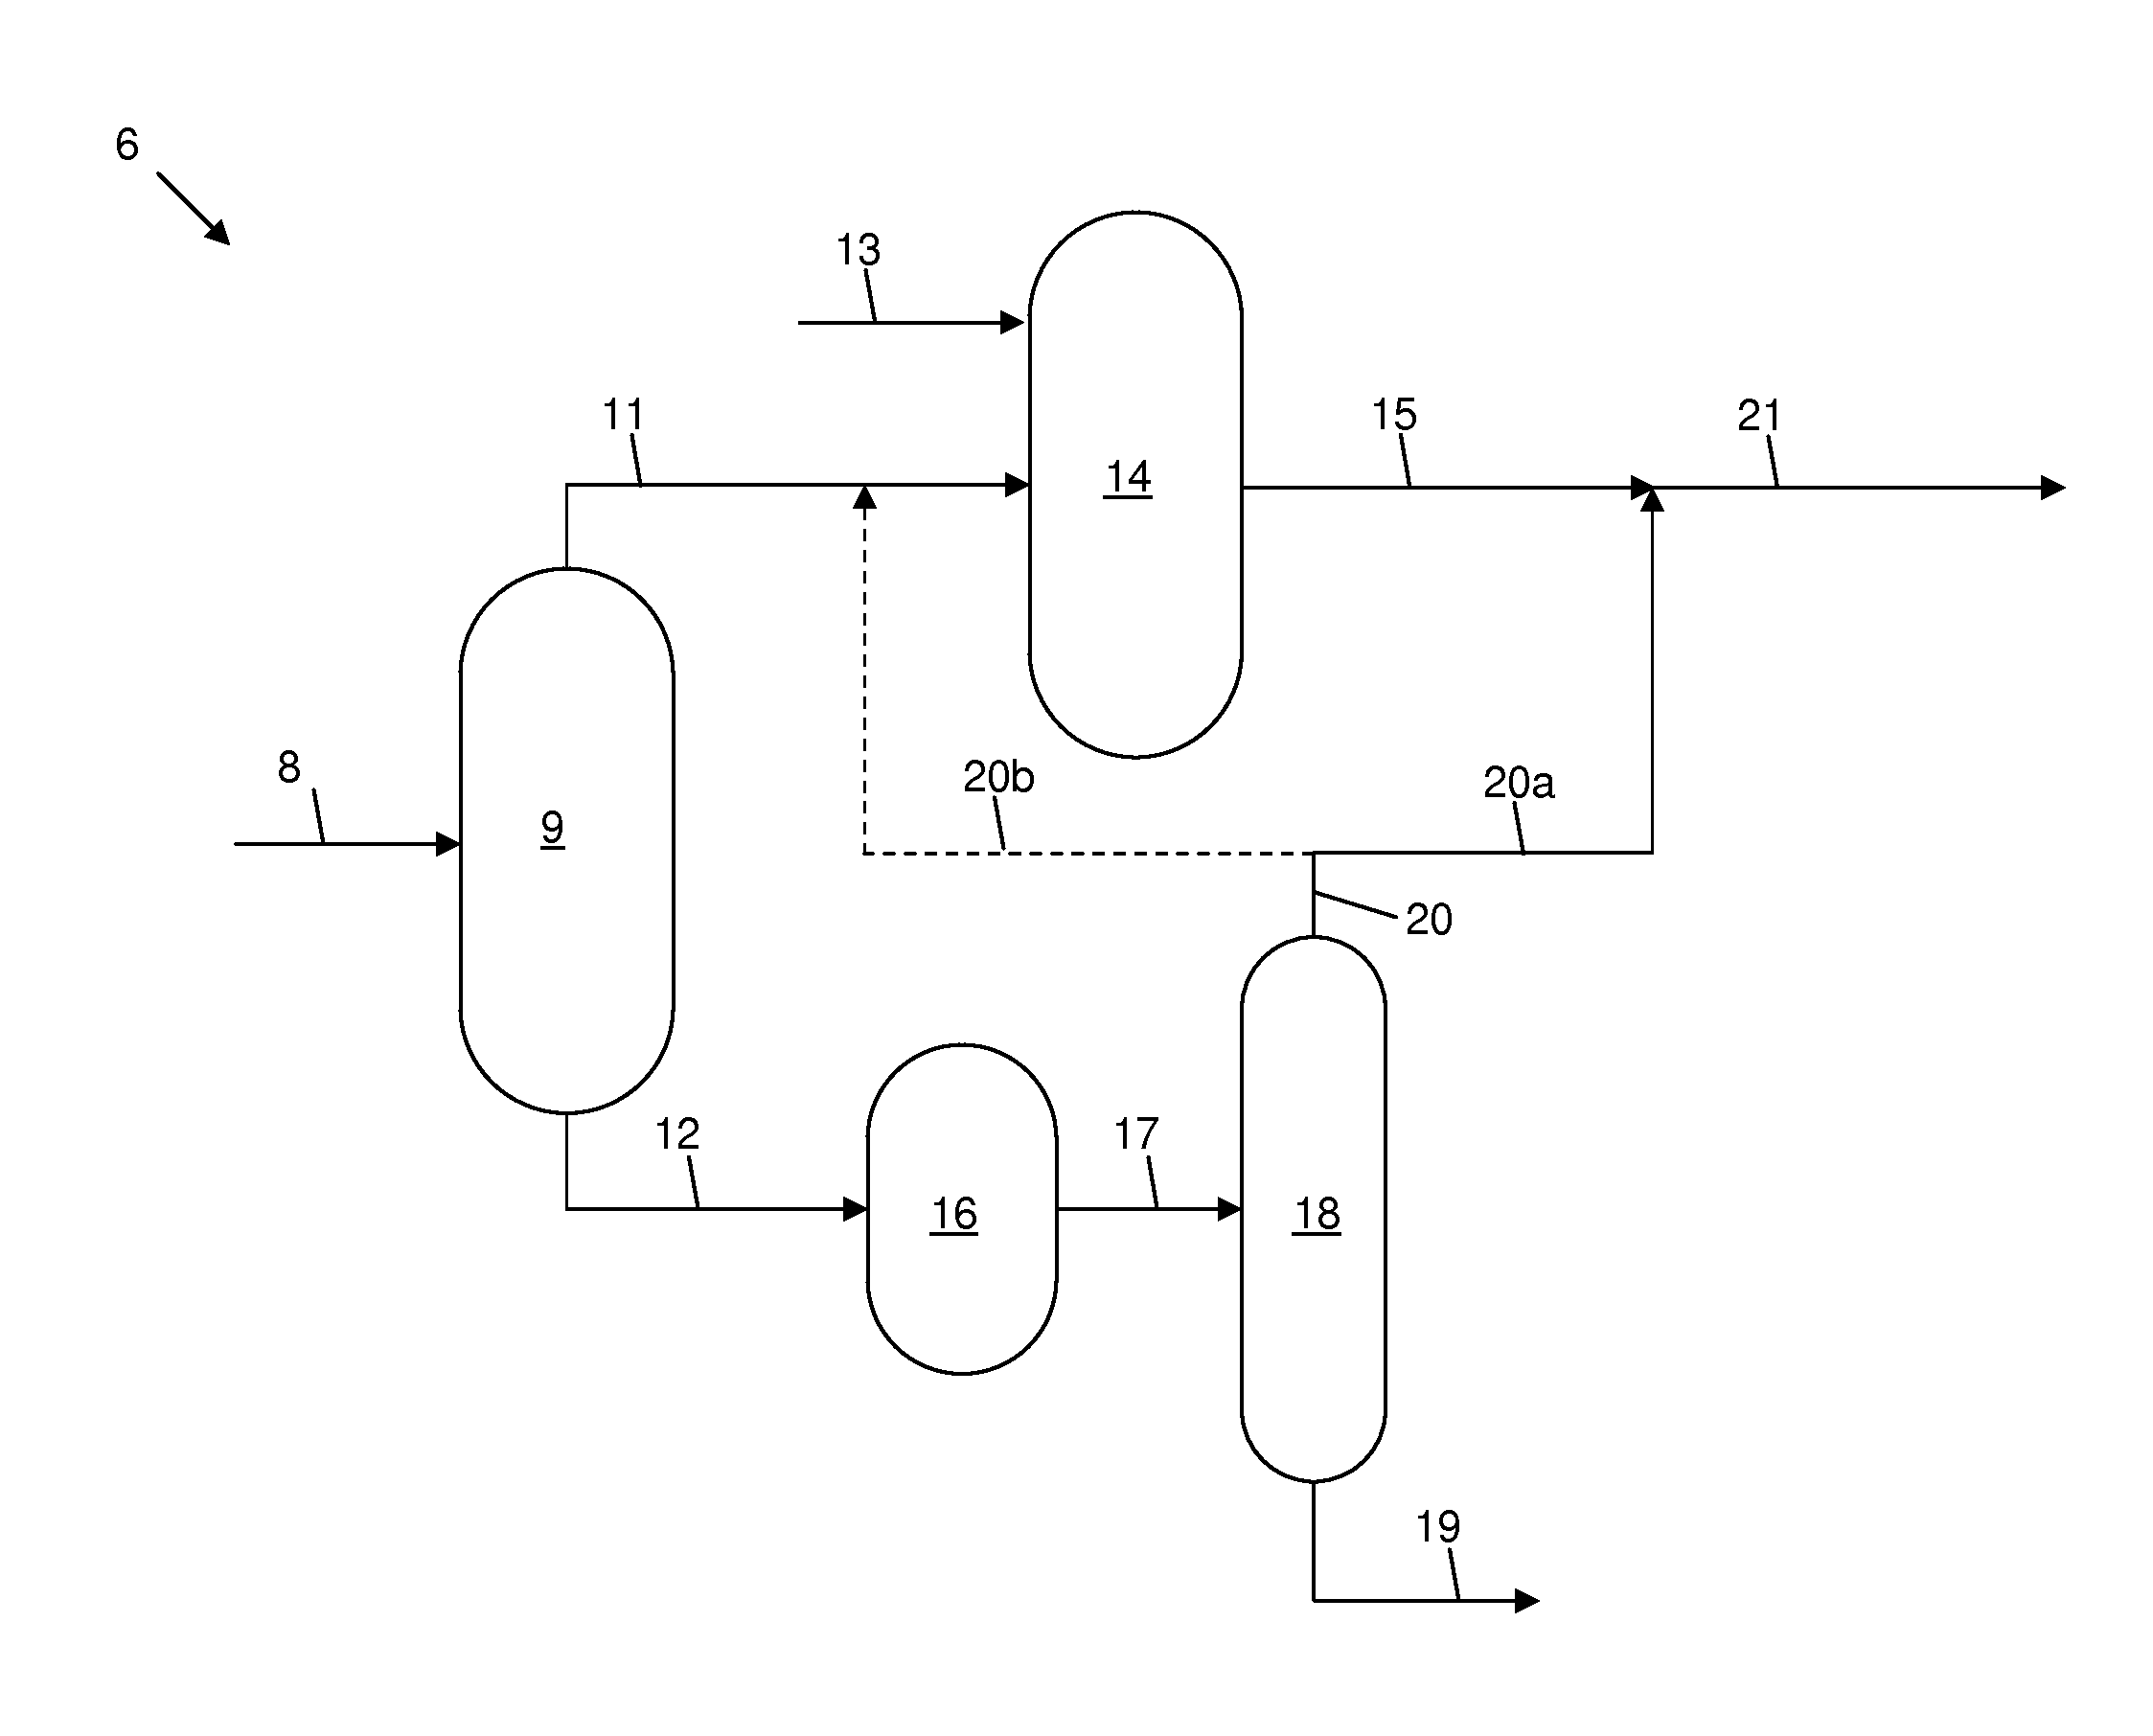 Targeted desulfurization process and apparatus integrating oxidative  desulfurization and hydrodesulfurization to produce diesel fuel having an ultra-low level of organosulfur compounds